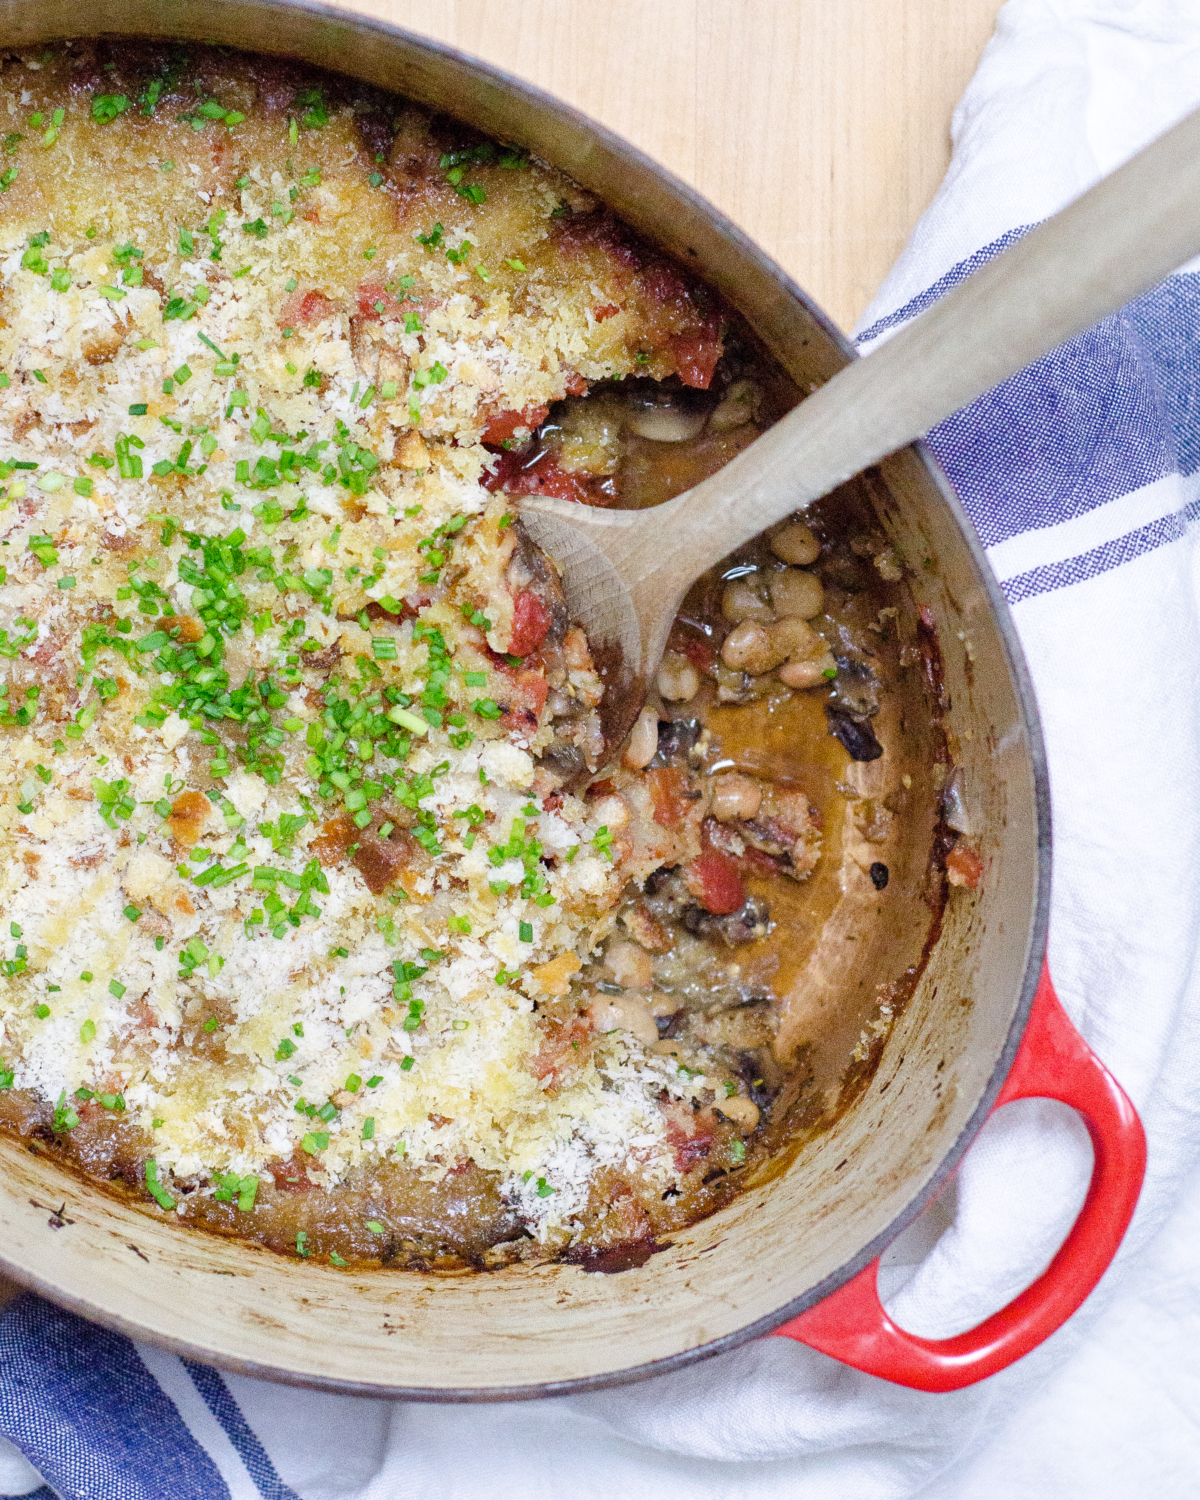 Vegetarian cassoulet recipe with mushrooms and eggplant that is super satisfying and delicious. The ultimate vegetarian comfort food!